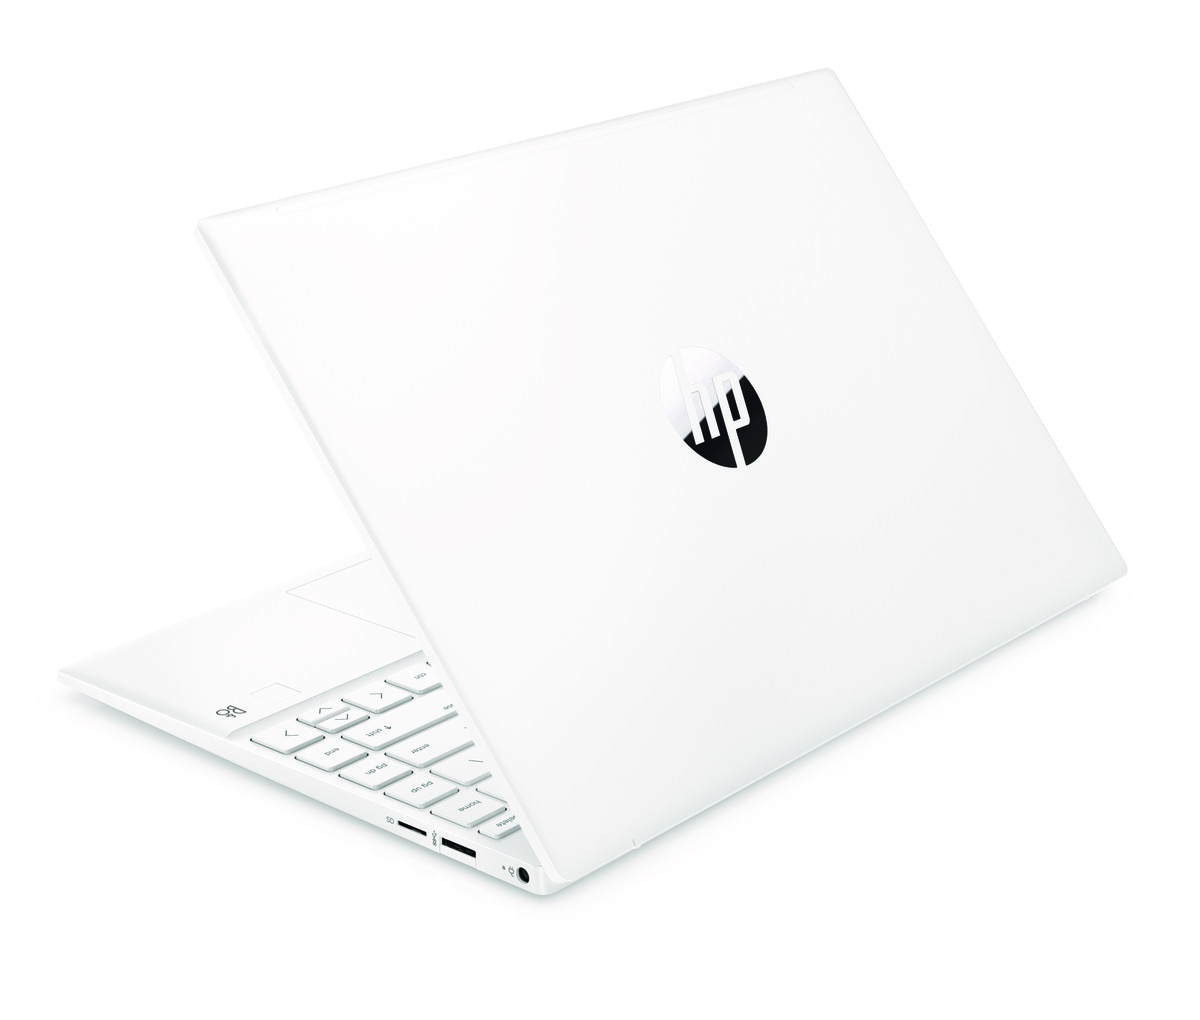 HP Pavilion Aero 13 Laptop PC, device specifications and price